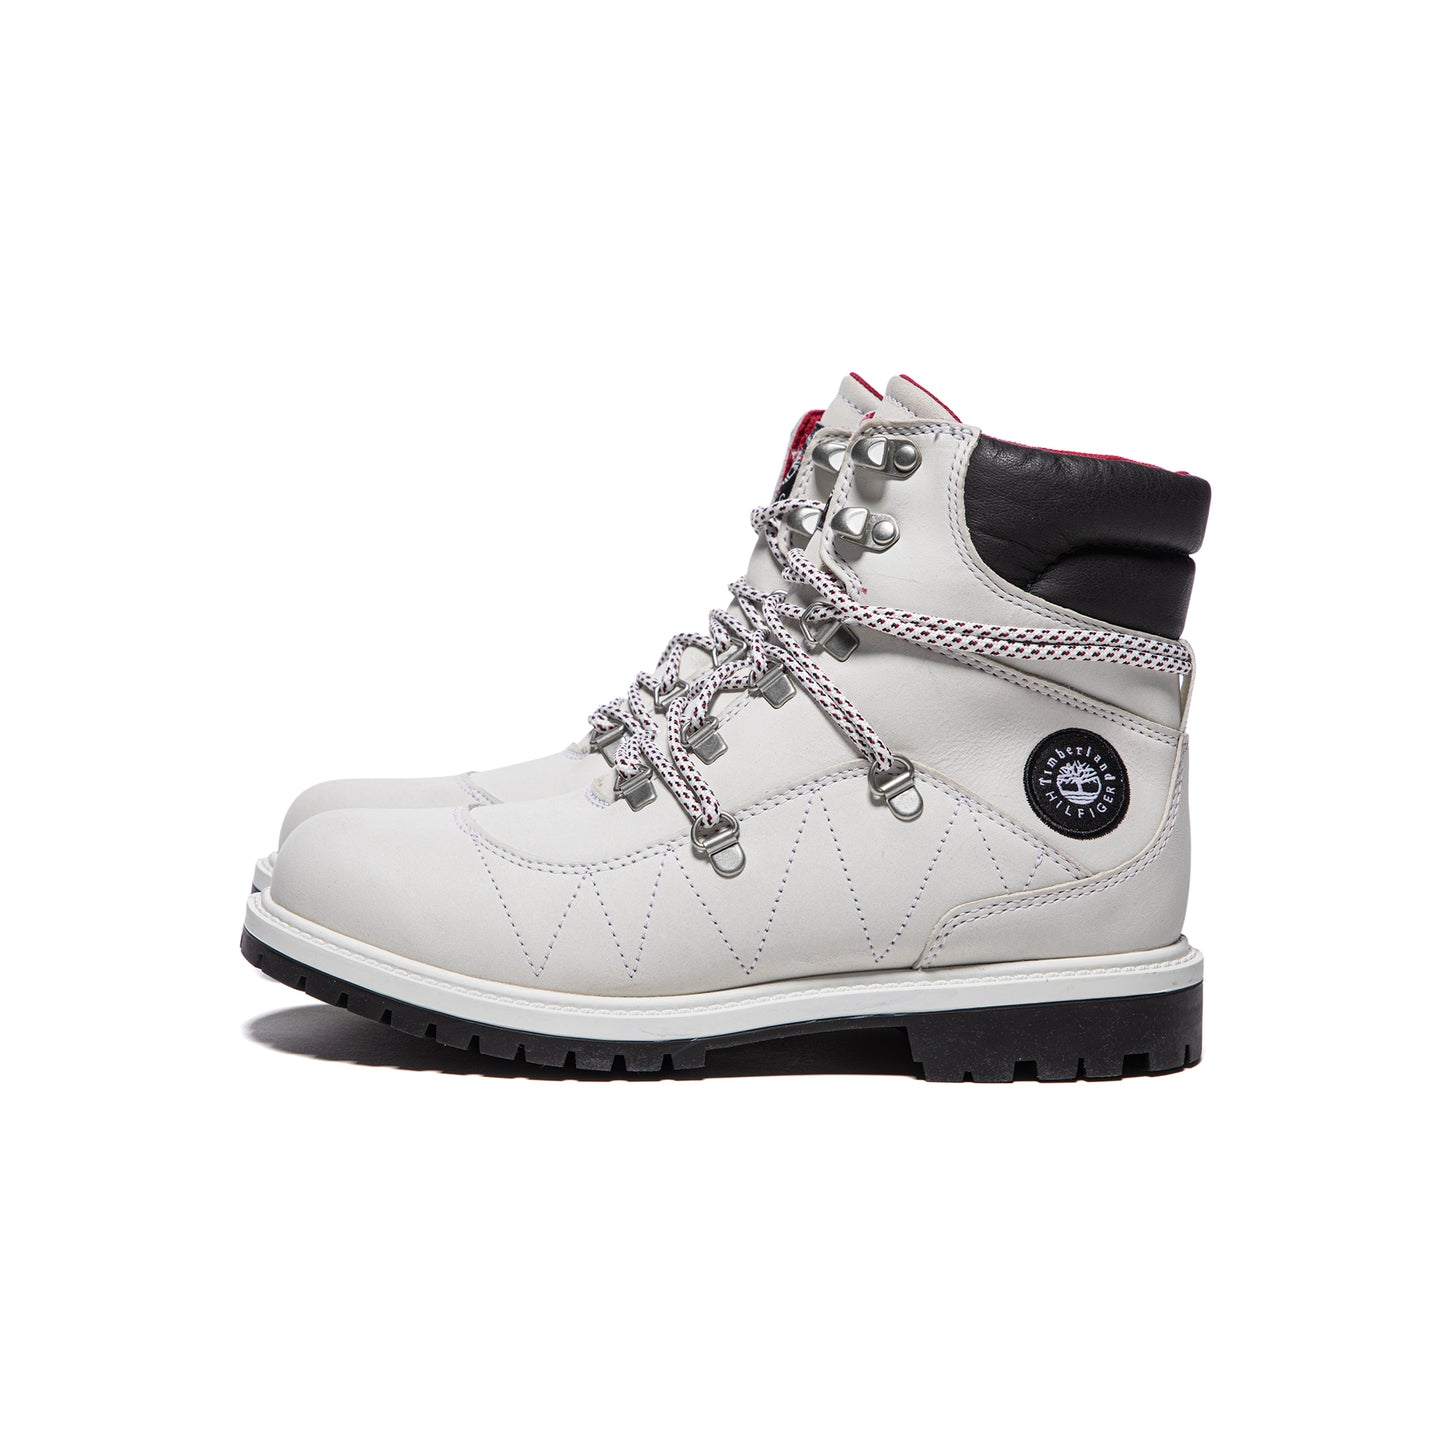 Tommy Hilfiger x Timberland Reimagined (White) – Concepts